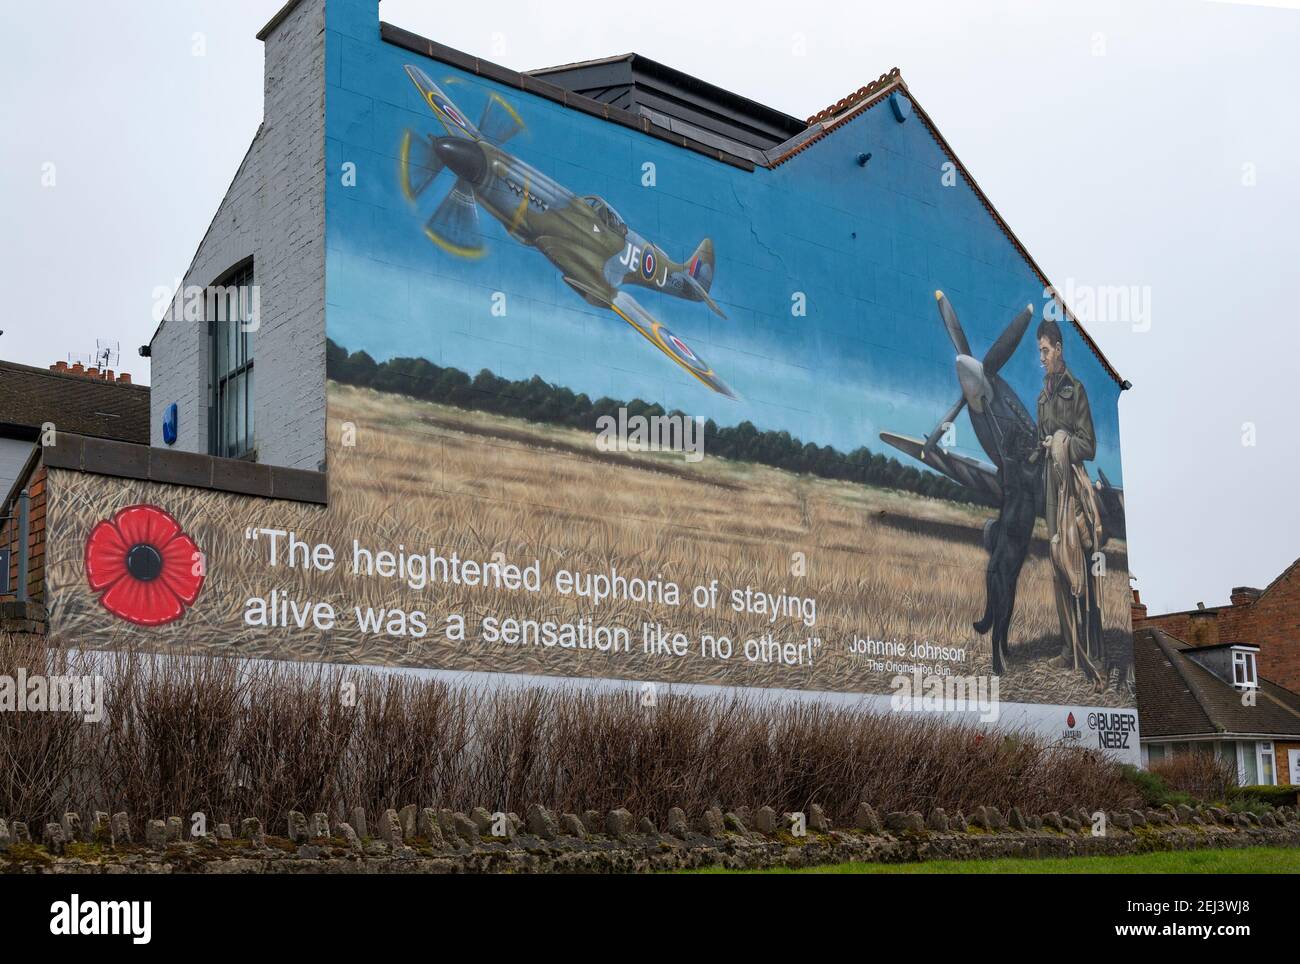 Loughborough, Leicestershire, UK. 21st February 2021.  A mural on the side of a building in Loughborough portrays the legendary Air Vice Marshal James Edgar ‘Johnnie’ Johnson, who was born locally.   The artwork pays tribute to the Second World War RAF Spitfire pilot, better known as Johnnie Johnson, who shot down more enemy aircraft than any other Allied fighter pilot during the war, flying some 700 operational sorties.   Painted by Buber Nebz, the mural is part of The Ladybird Collective, which is behind several artworks appearing in Loughborough.  Credit: Matt Limb/Alamy Live News Stock Photo